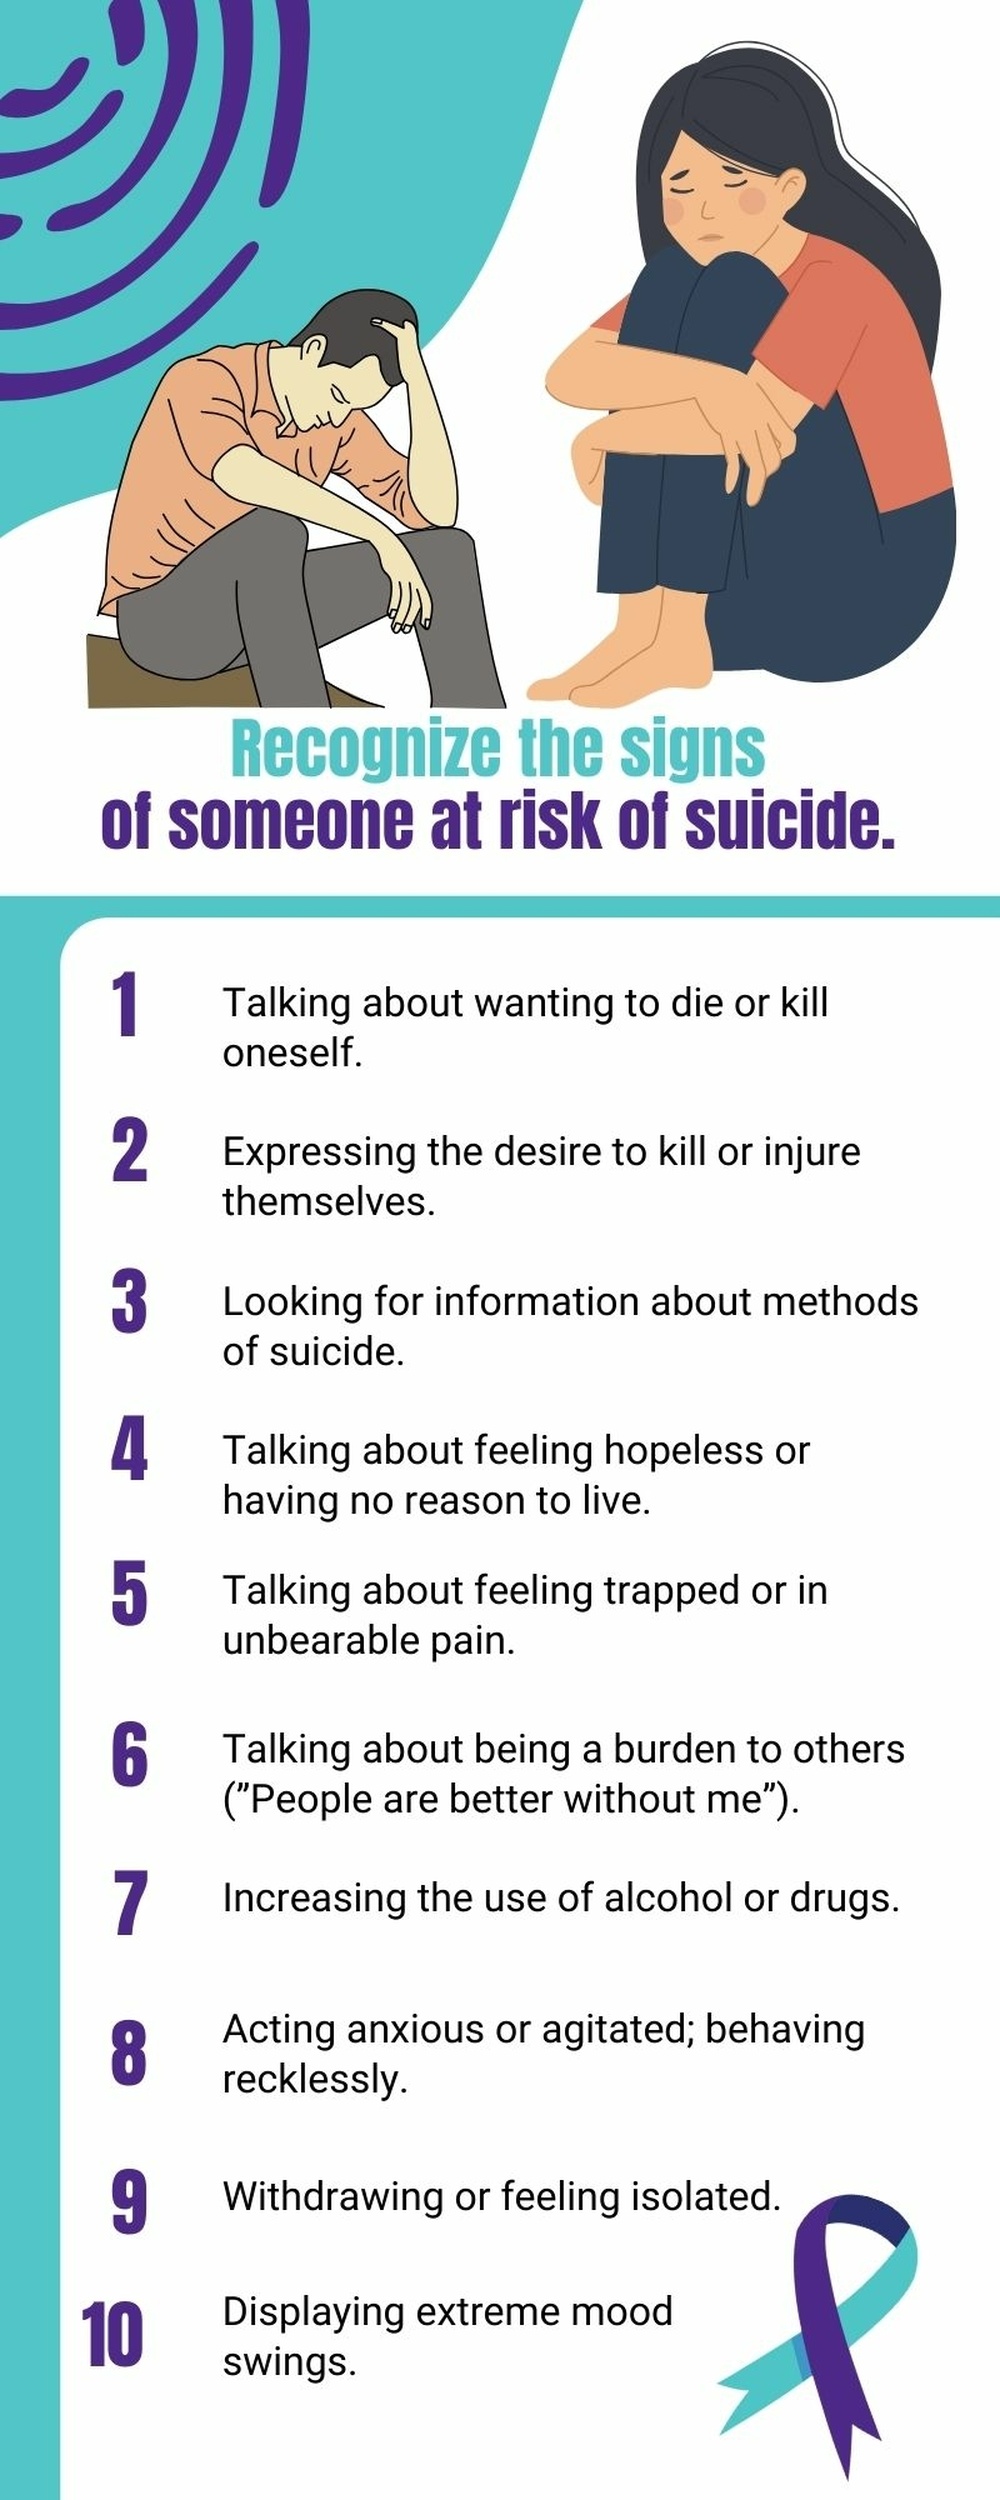 Recognize the signs of someone at risk of suicide